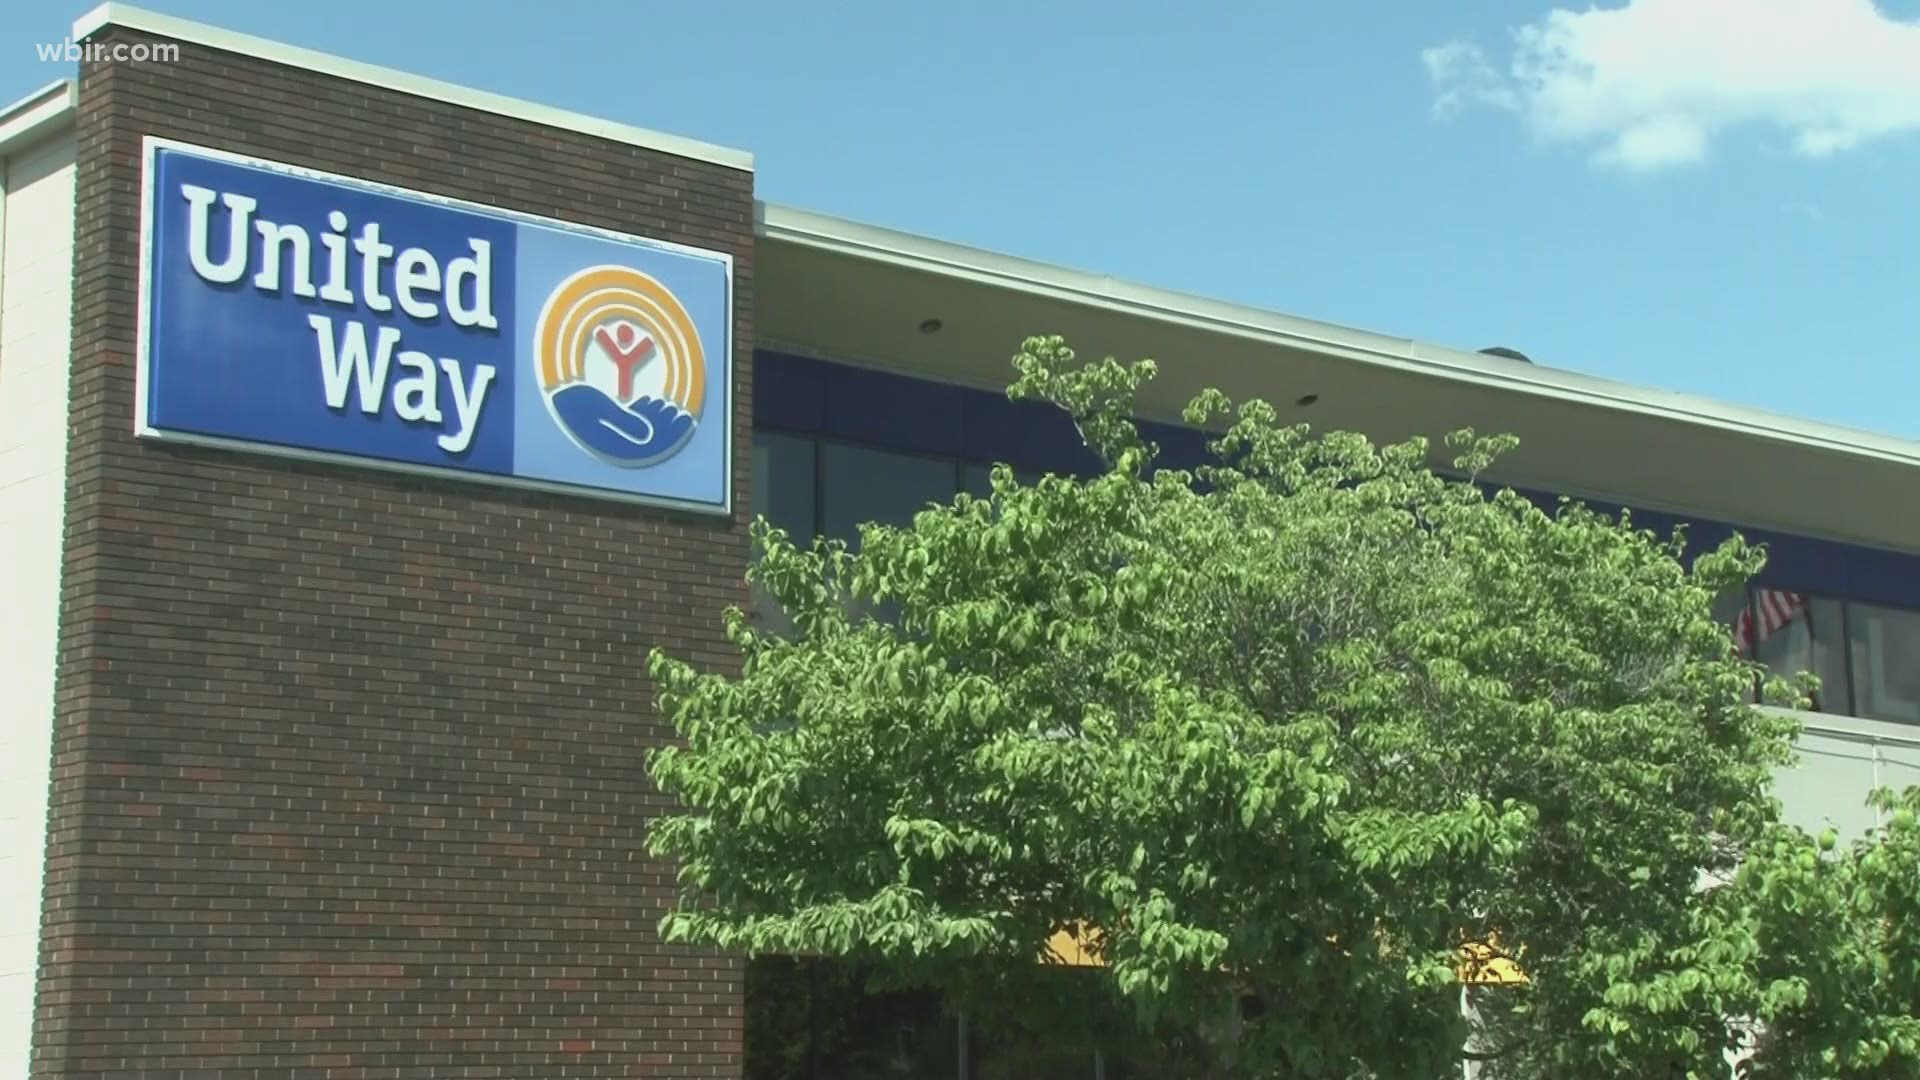 The United Way is calling its new "community healing fund" a first step in addressing some of the biggest problems across Knoxville.